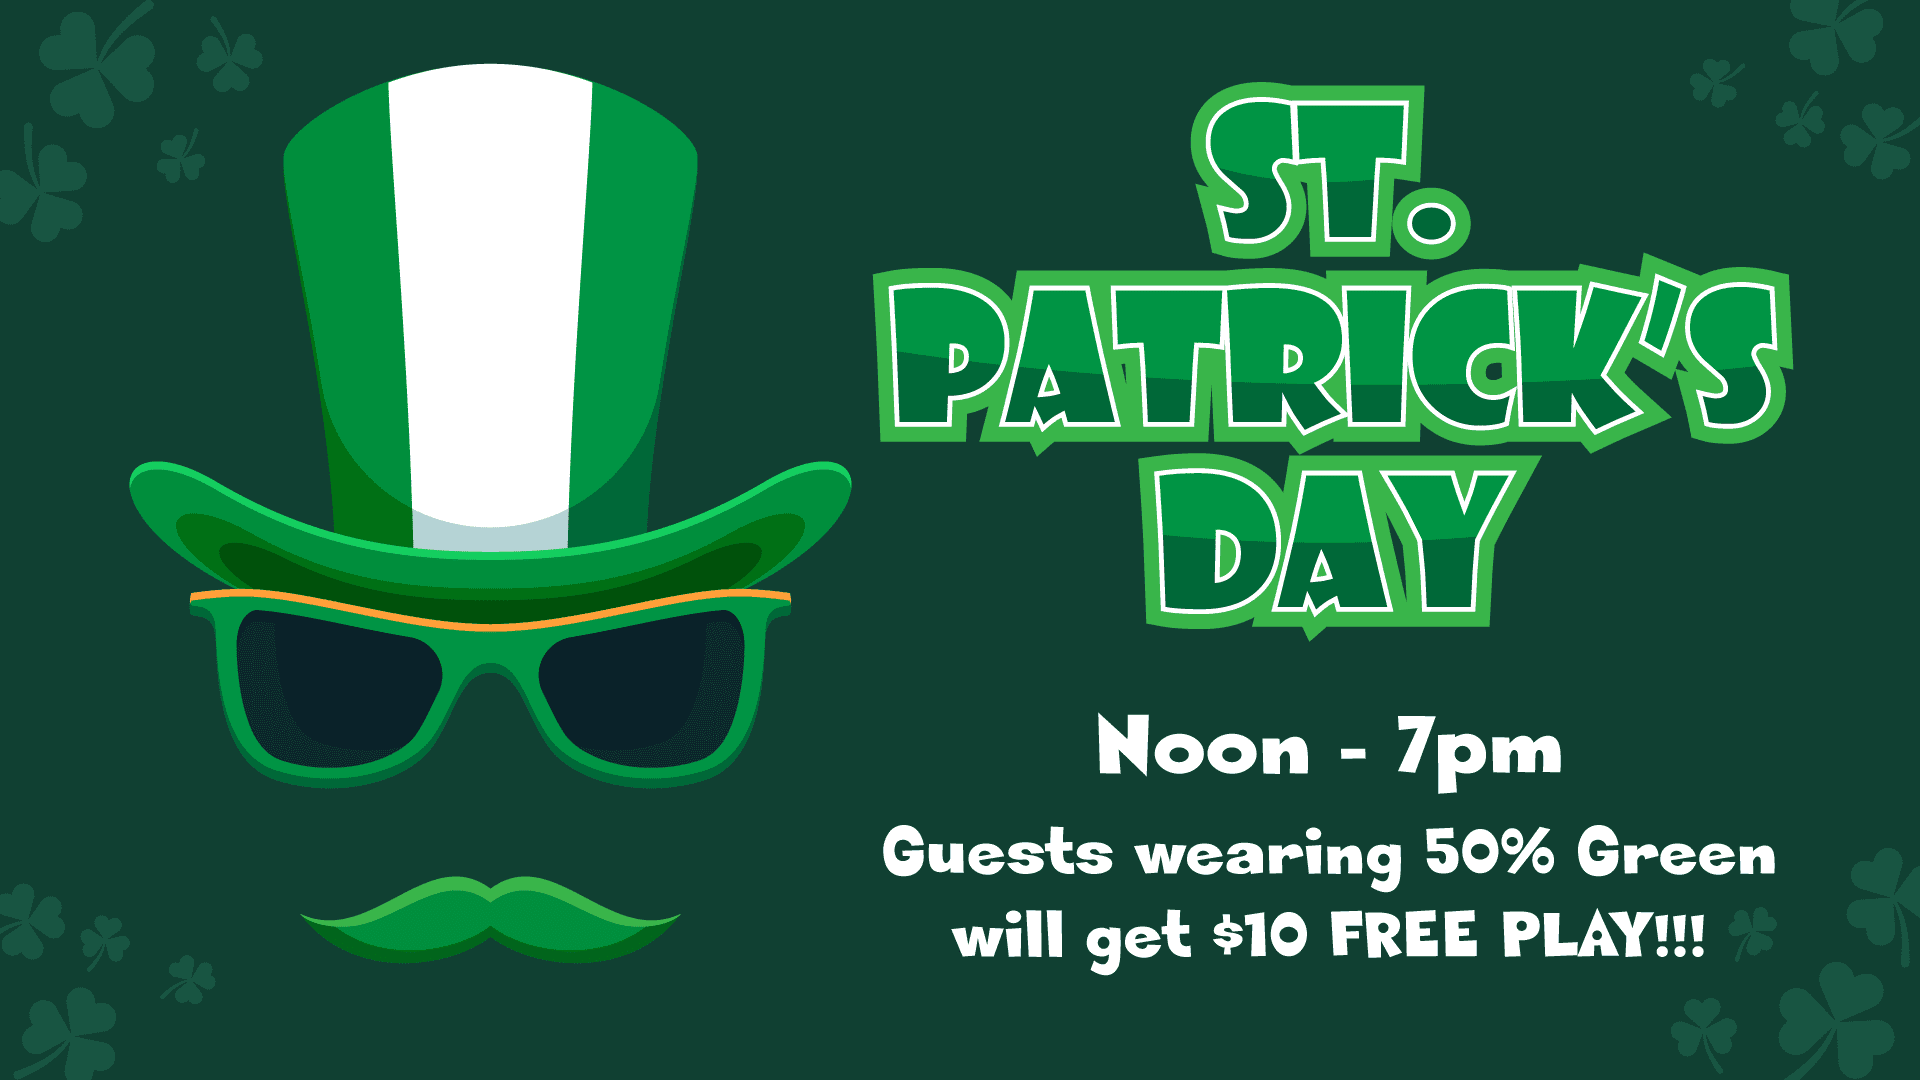 Saint patrick's day event announcement with a caricature of a leprechaun hat, sunglasses, and mustache, offering $10 free play for guests wearing 50% green from noon to 7 pm.